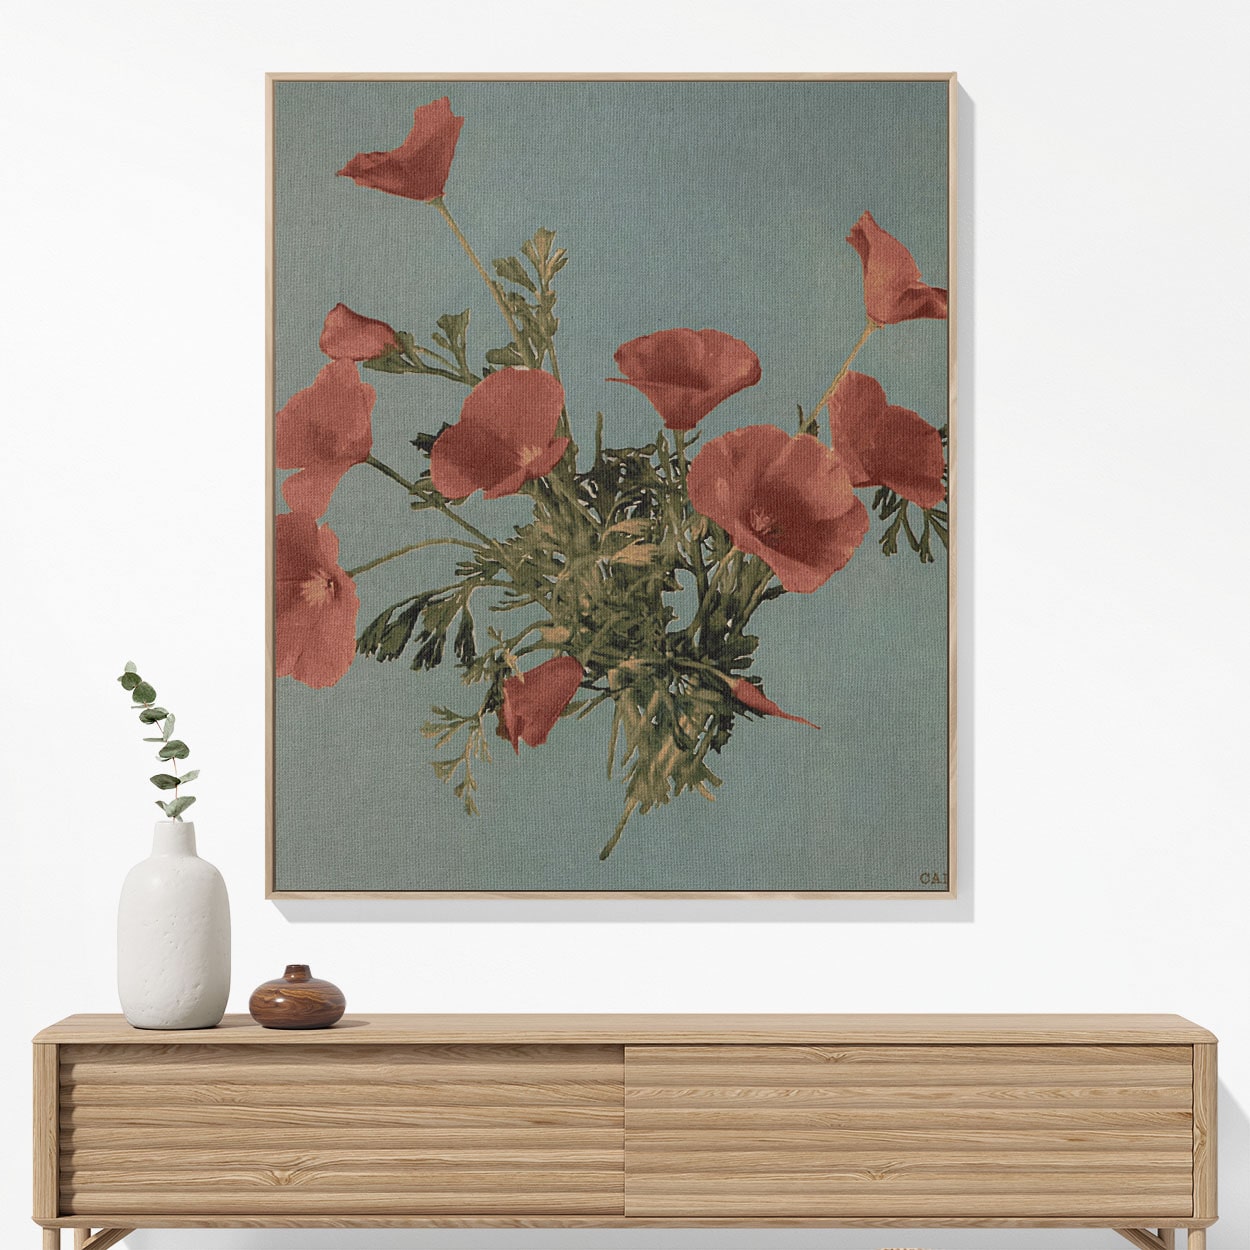 Vintage Floral Woven Blanket Woven Blanket Hanging on a Wall as Framed Wall Art